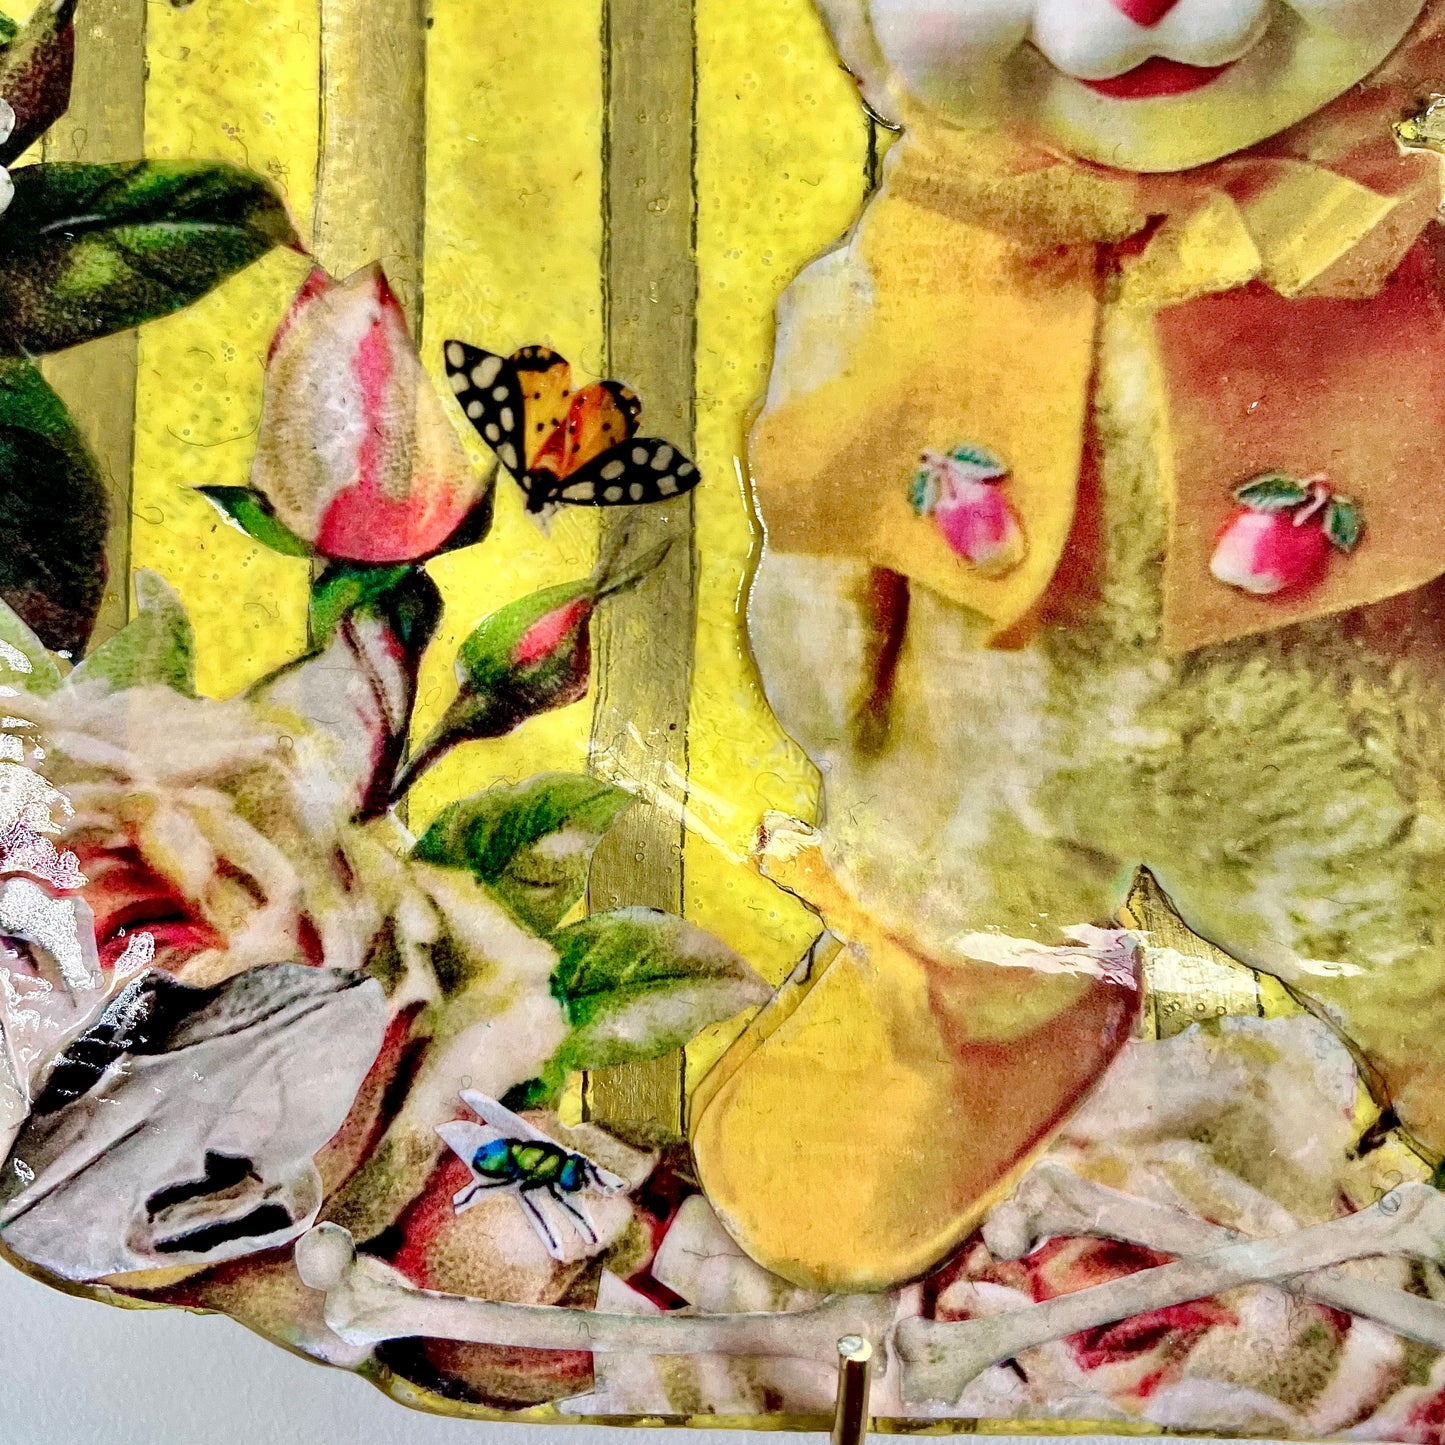 "Not Seeking Anyone's Approval" Wall Plate by House of Frisson, closeup detail of the collage showing a kitsch vintage bunny toy, roses, bones, moths, on a yellow and gold striped background.